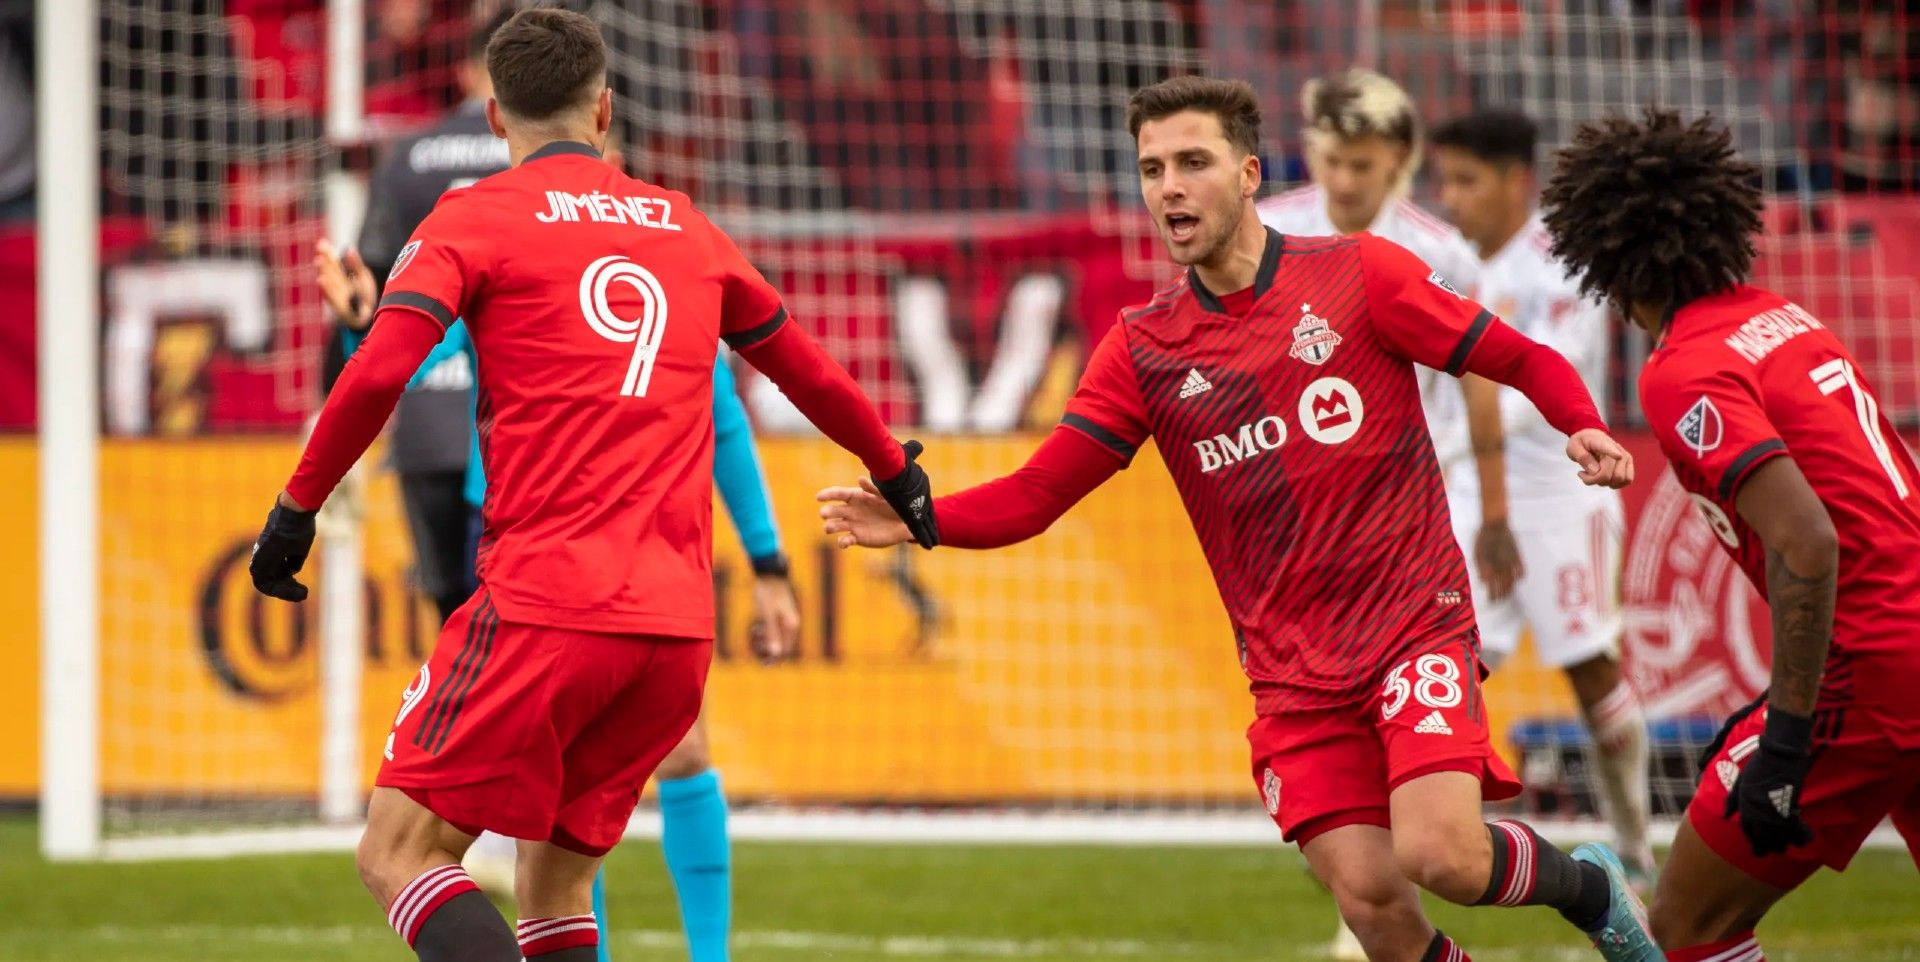 Tactical breakdown: Luca Petrasso offering Toronto FC plenty on both sides of the ball